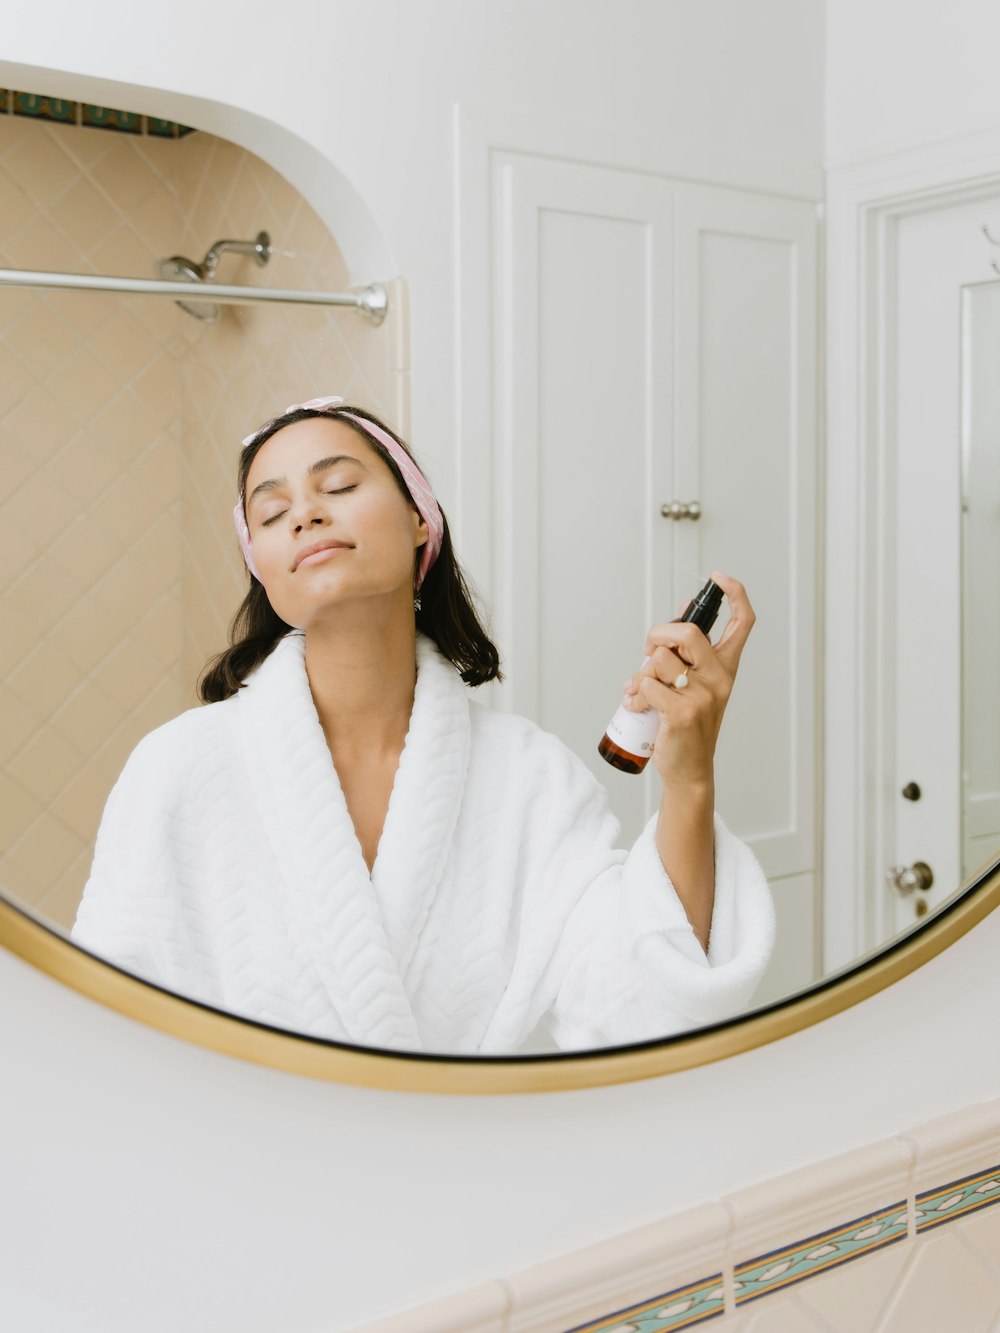 Popular skincare tips that are wrong and can hurt your skin. These skincare scams are terrible advice as they can worsen your skin condition. Stop using painful skincare products.